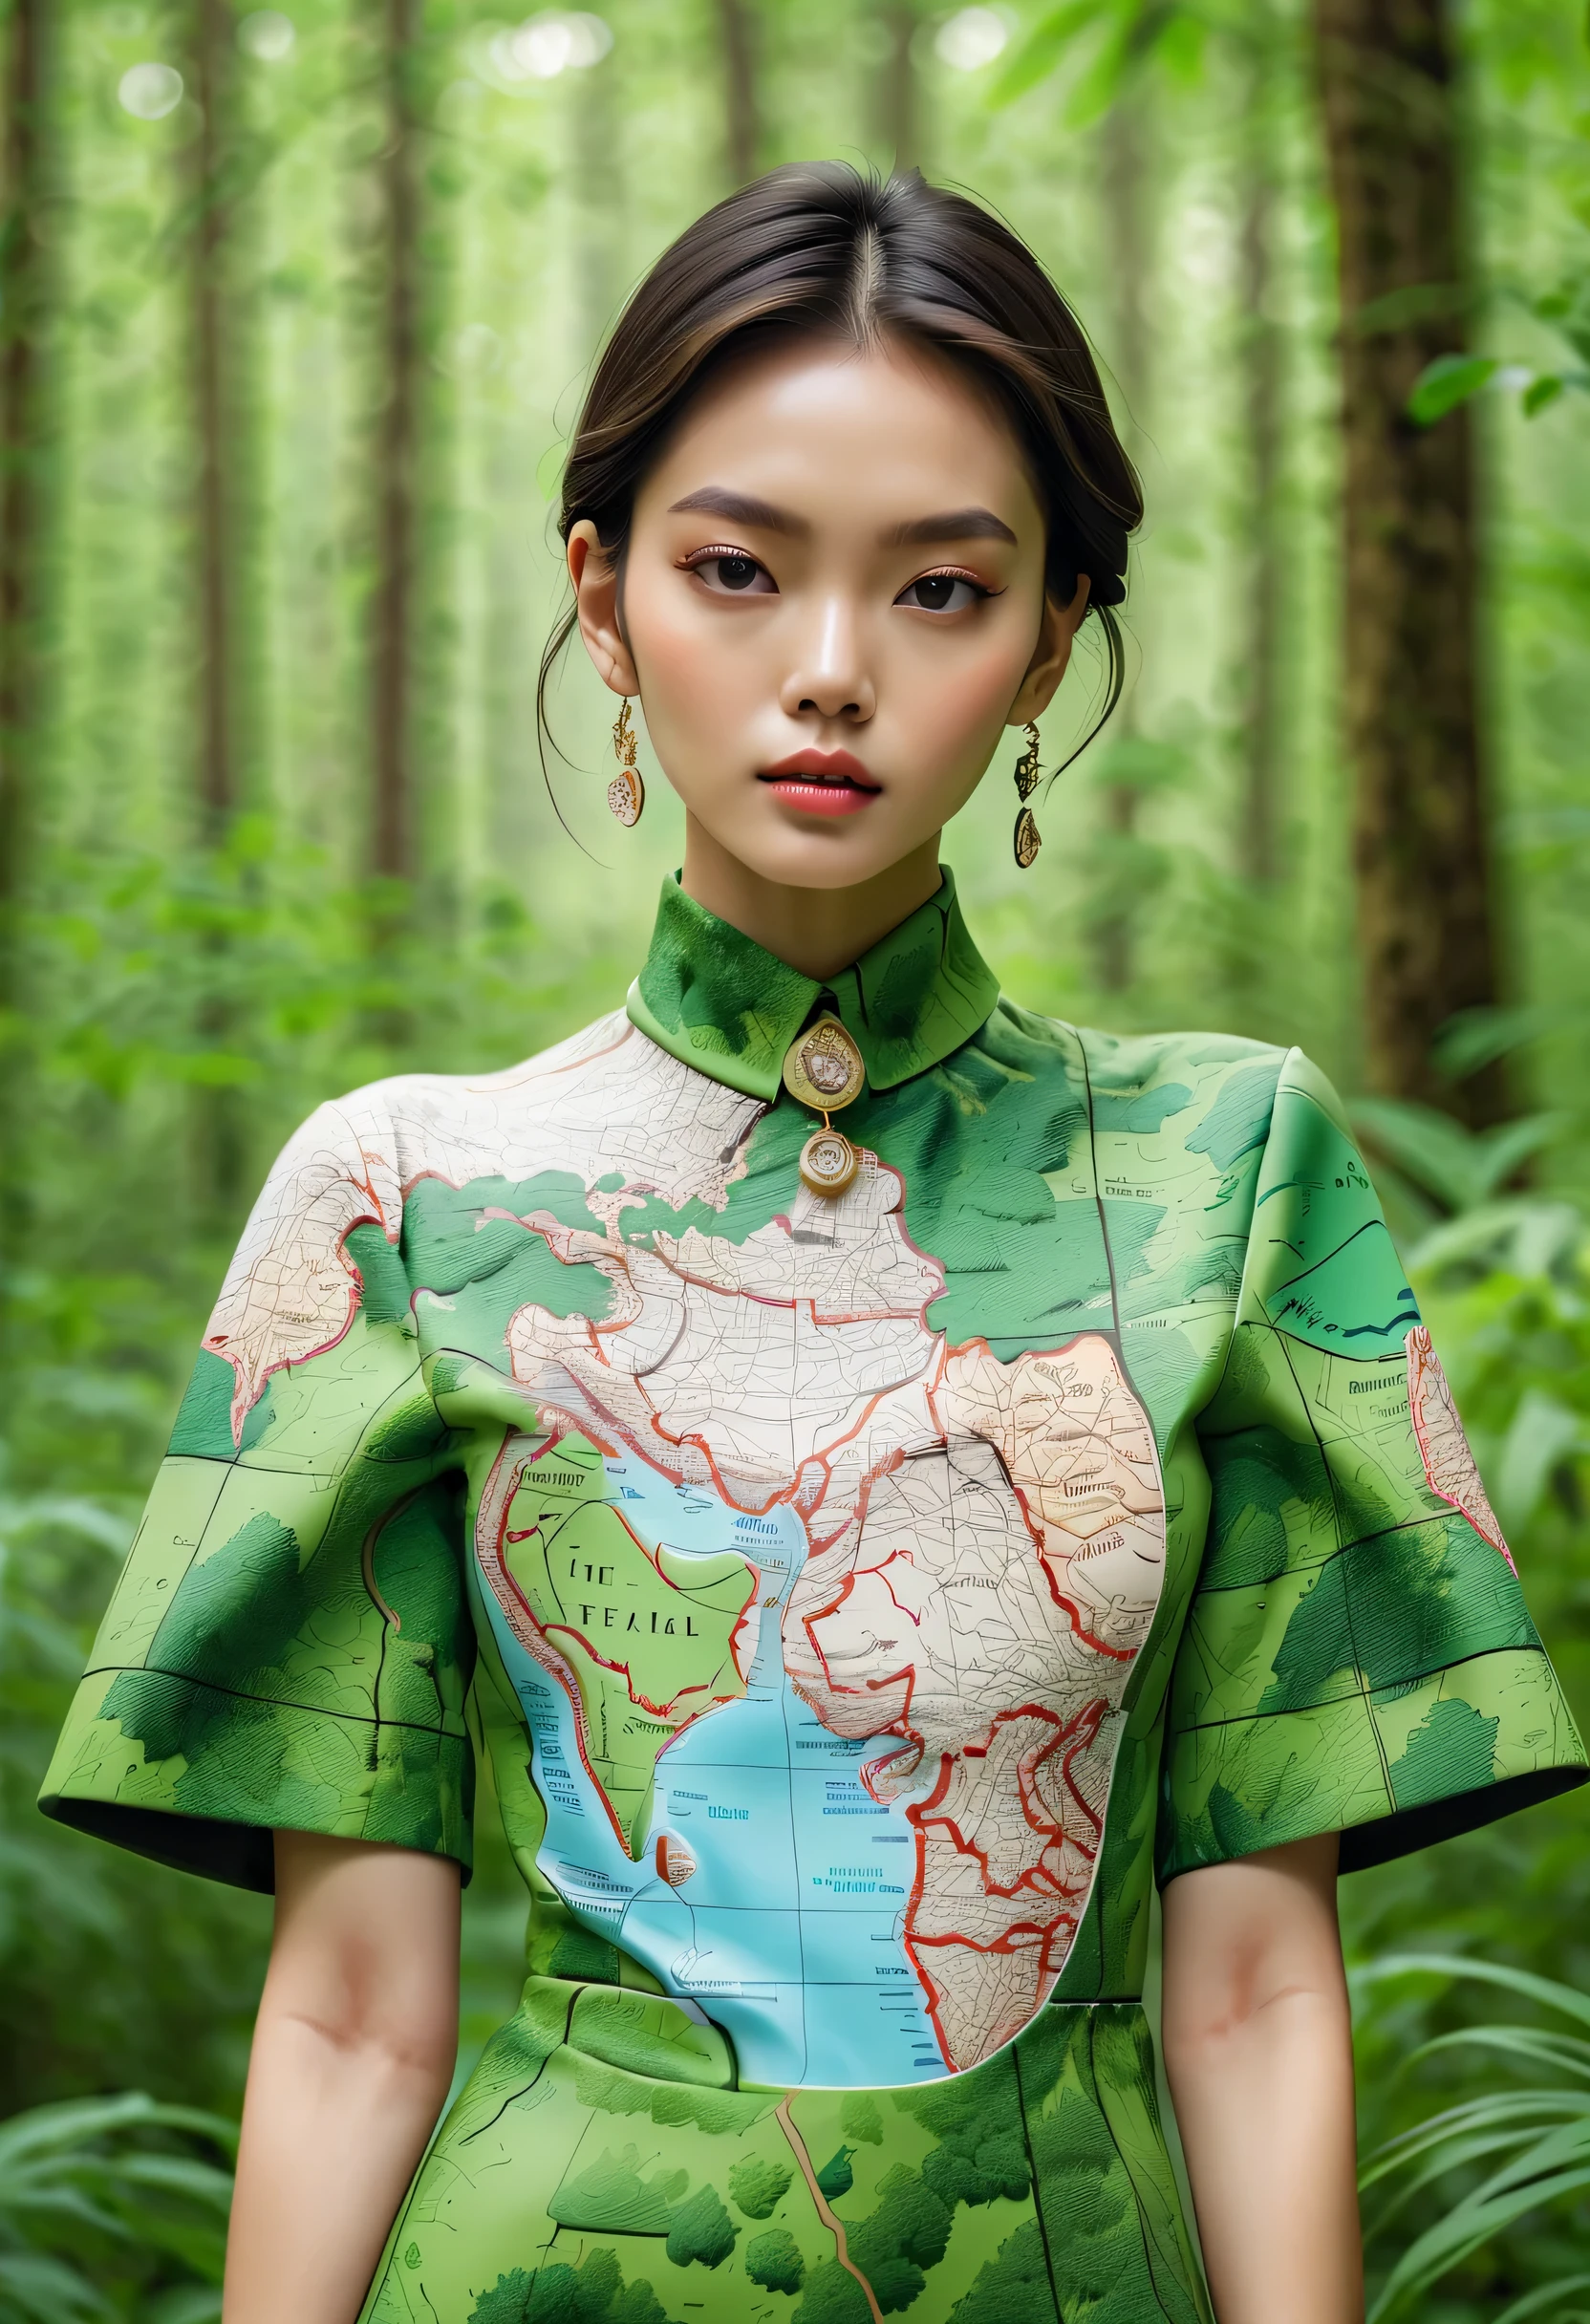 Series set，Creative jewelry，About map elements，Beautifullyly，Beautifully，exaggerate，Model wears map patterned clothes，advanced，extremely beautiful。Blurred green forest background